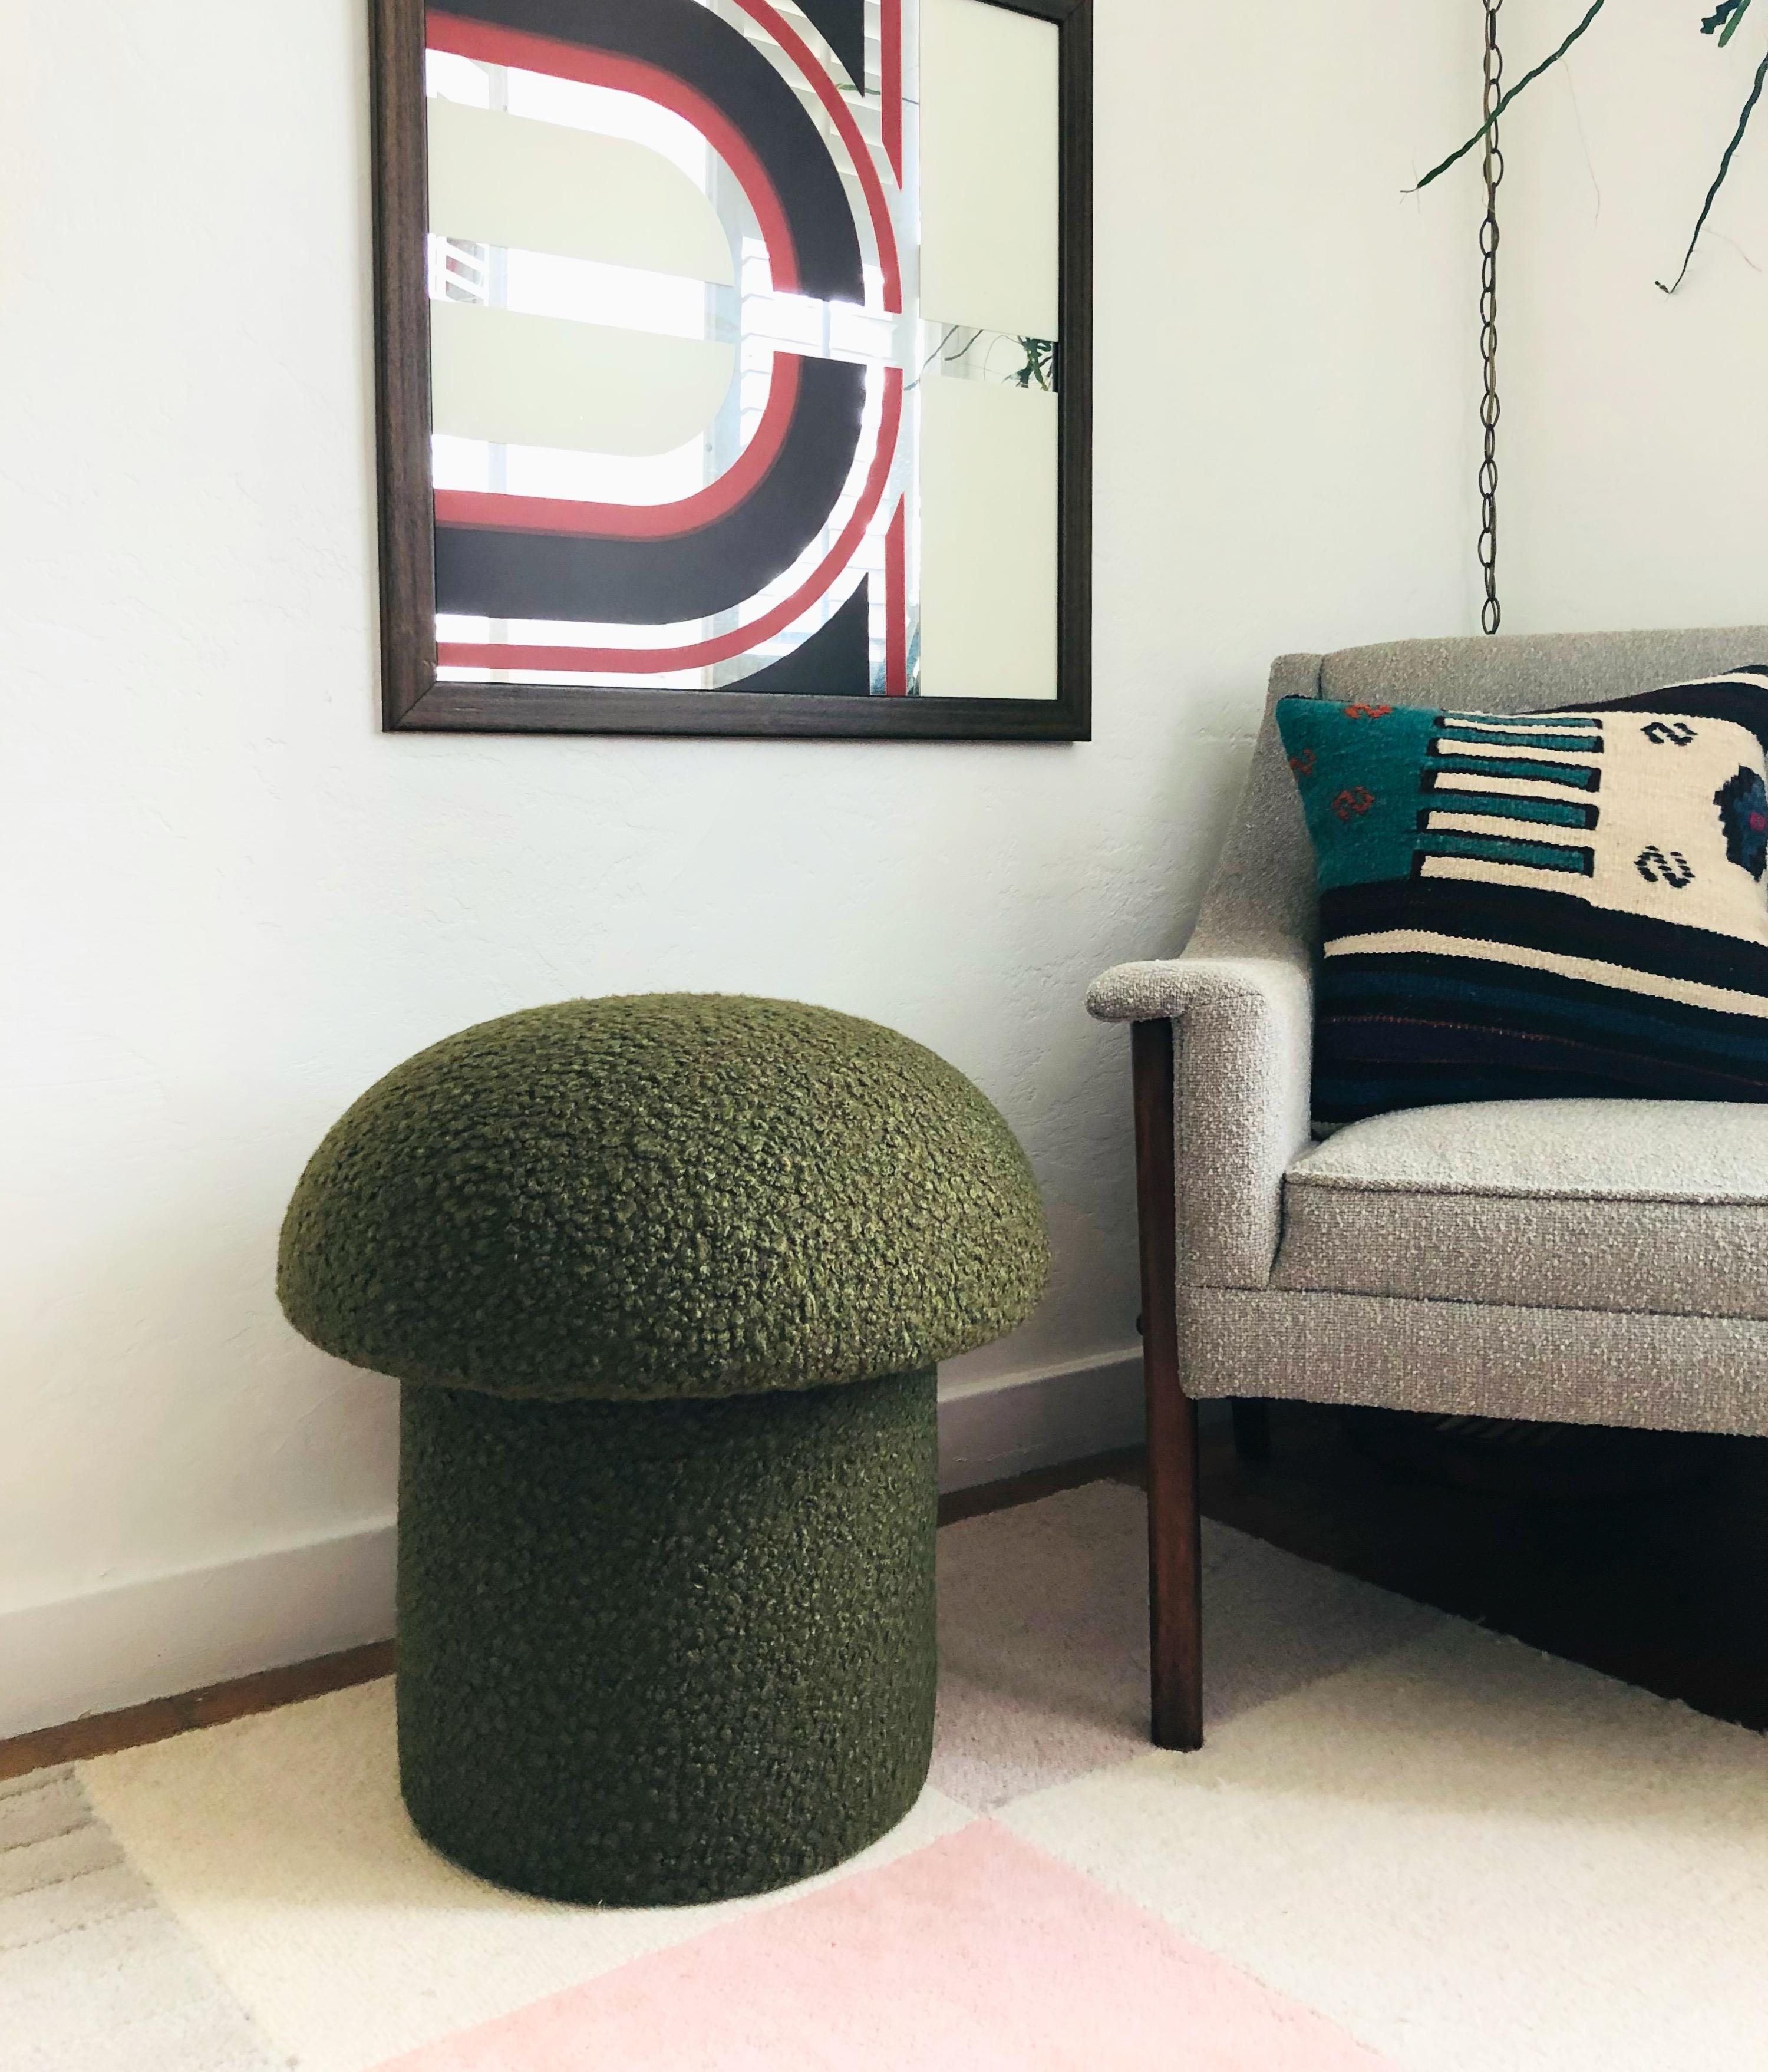 A handmade mushroom shaped ottoman, upholstered in an olive green colored curly boucle fabric. Perfect for using as a footstool or extra occasional seating. A great sculptural accent piece.
Mushroom ottomans are made to order, customizations are